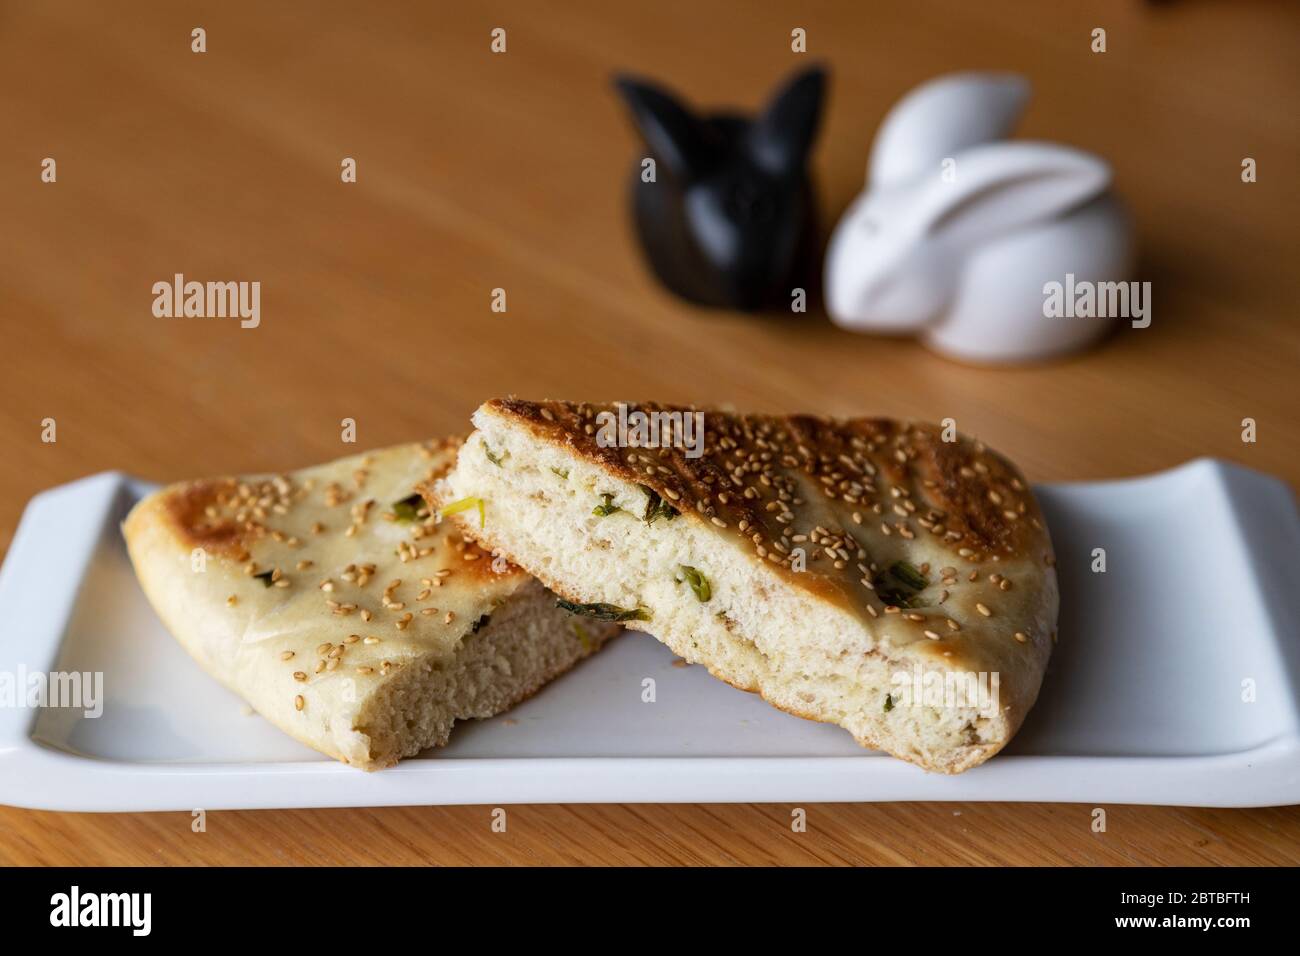 Close up of Chinese halal food known as sesame scallion bread, a popular staple in Northern China. The bread is stuffed with spring onions and topped Stock Photo